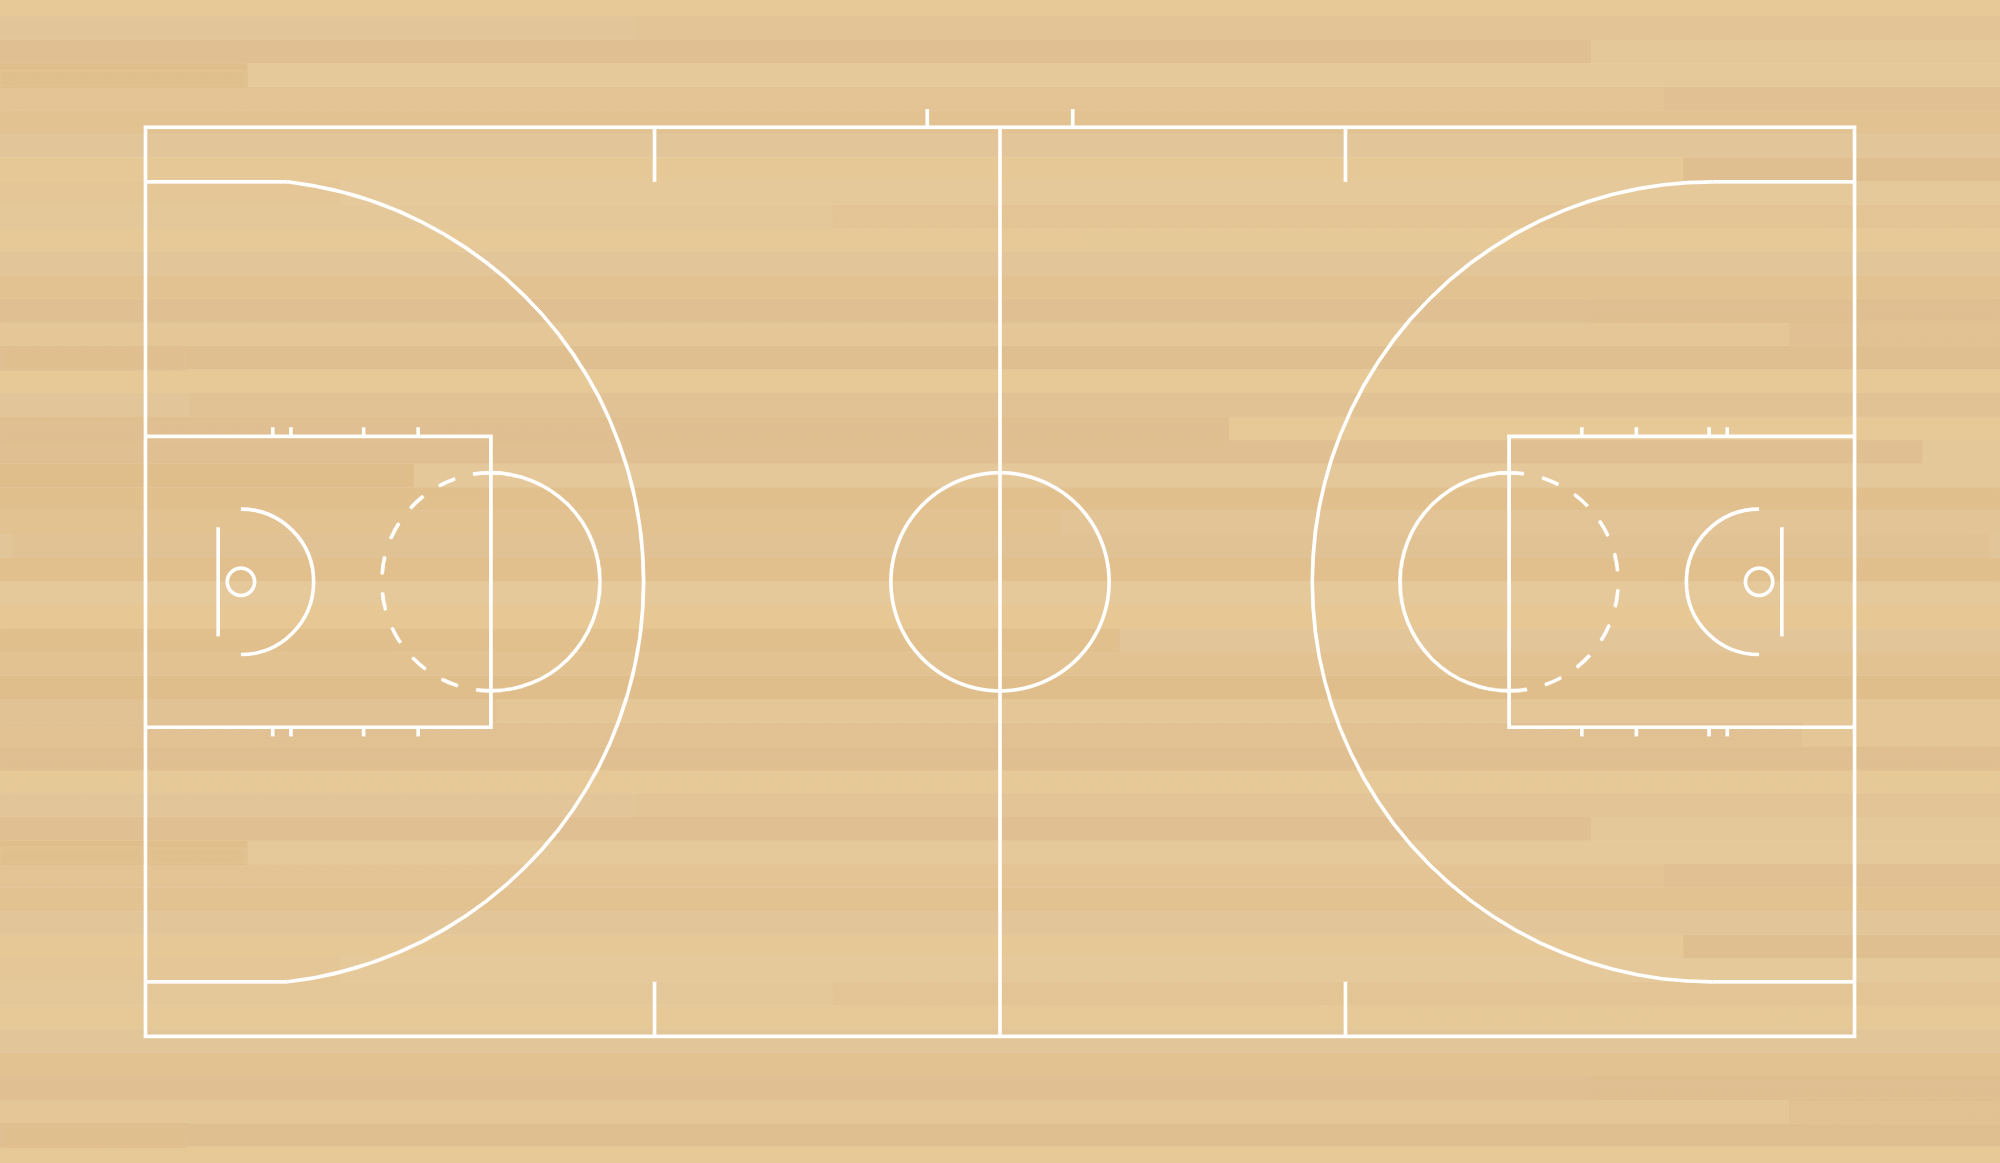 38 Label Parts Of Basketball Court